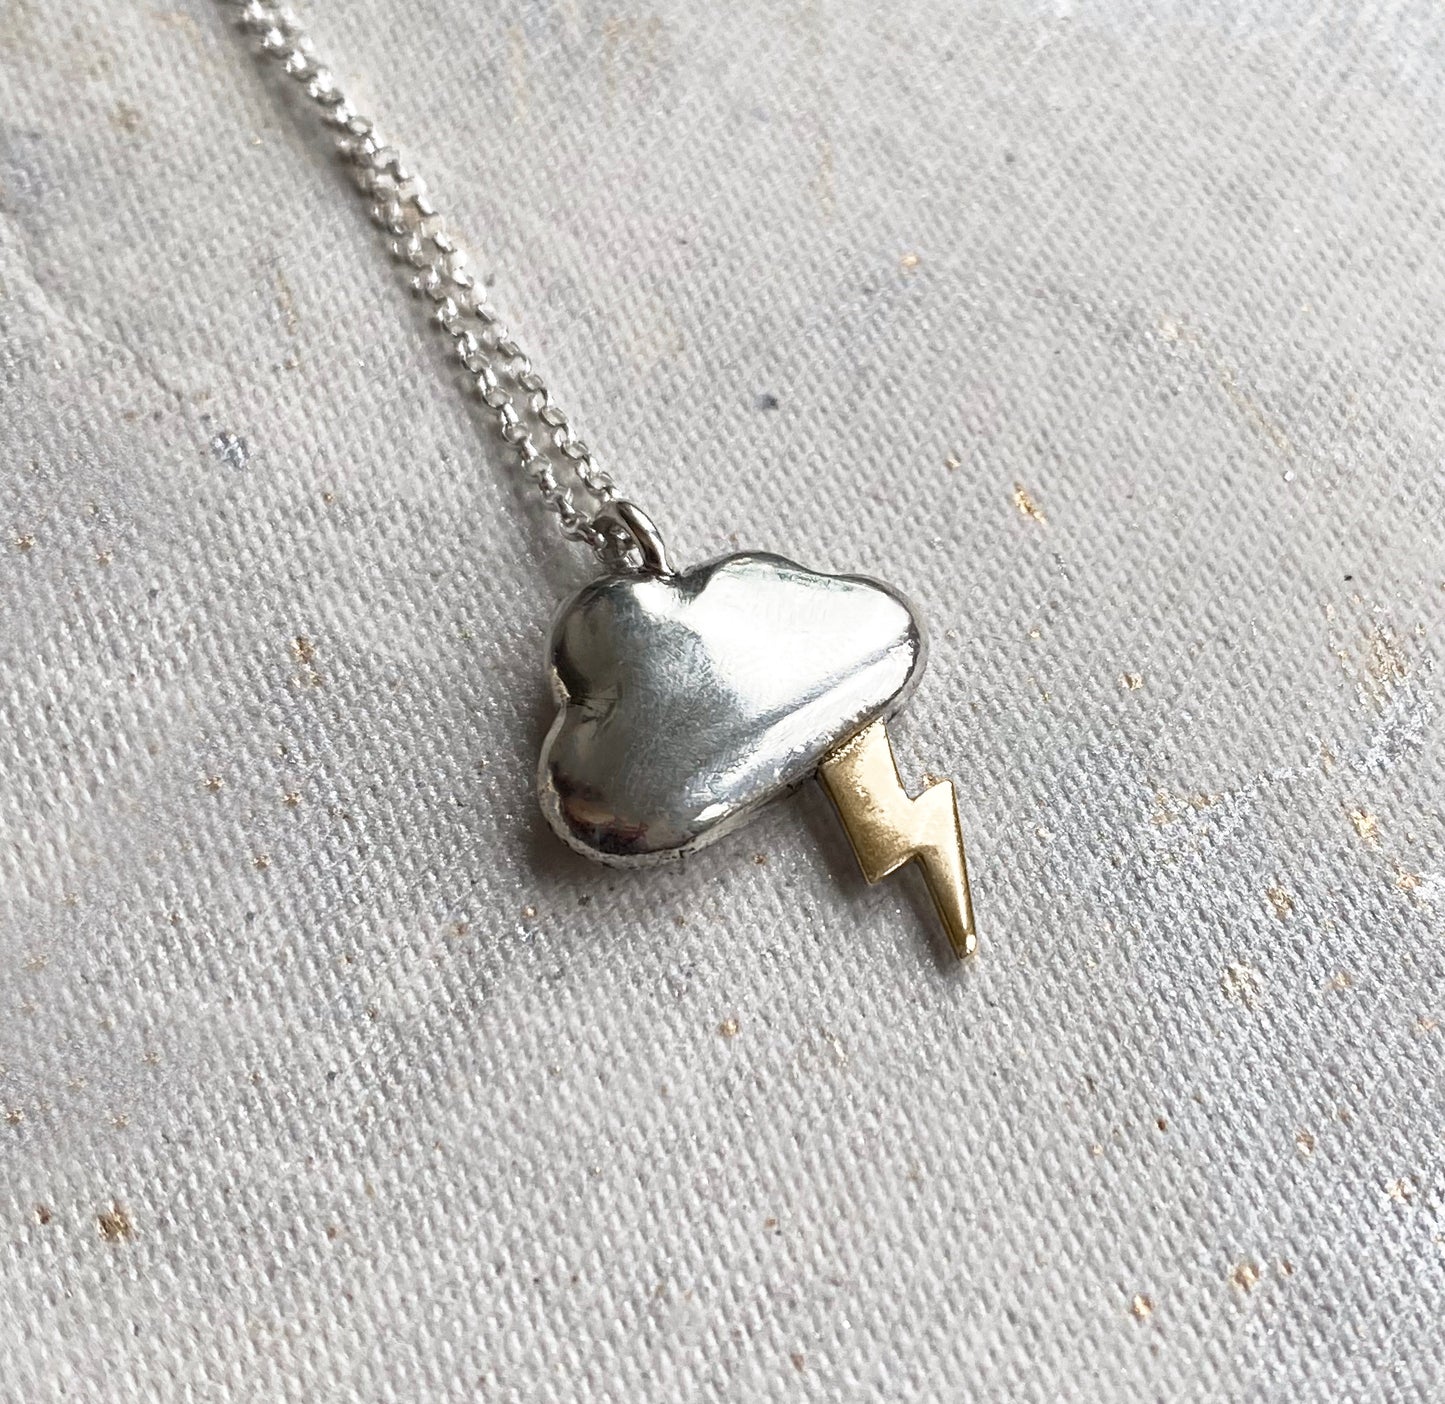 Silver Linings necklace - solid silver cloud with silver or gold lightning bolt